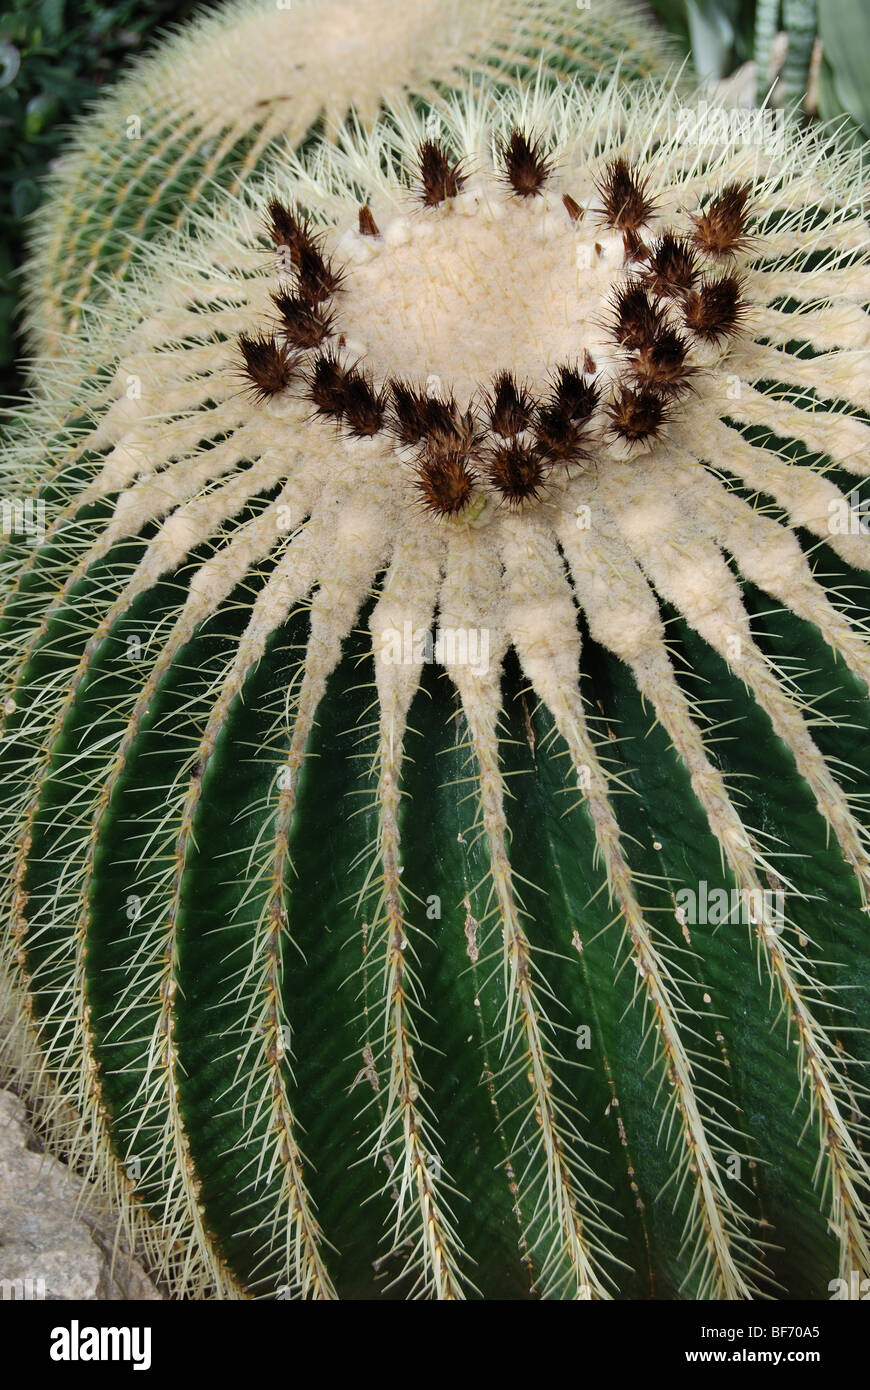 Detail of a Golden Barrel cacti plant Stock Photo